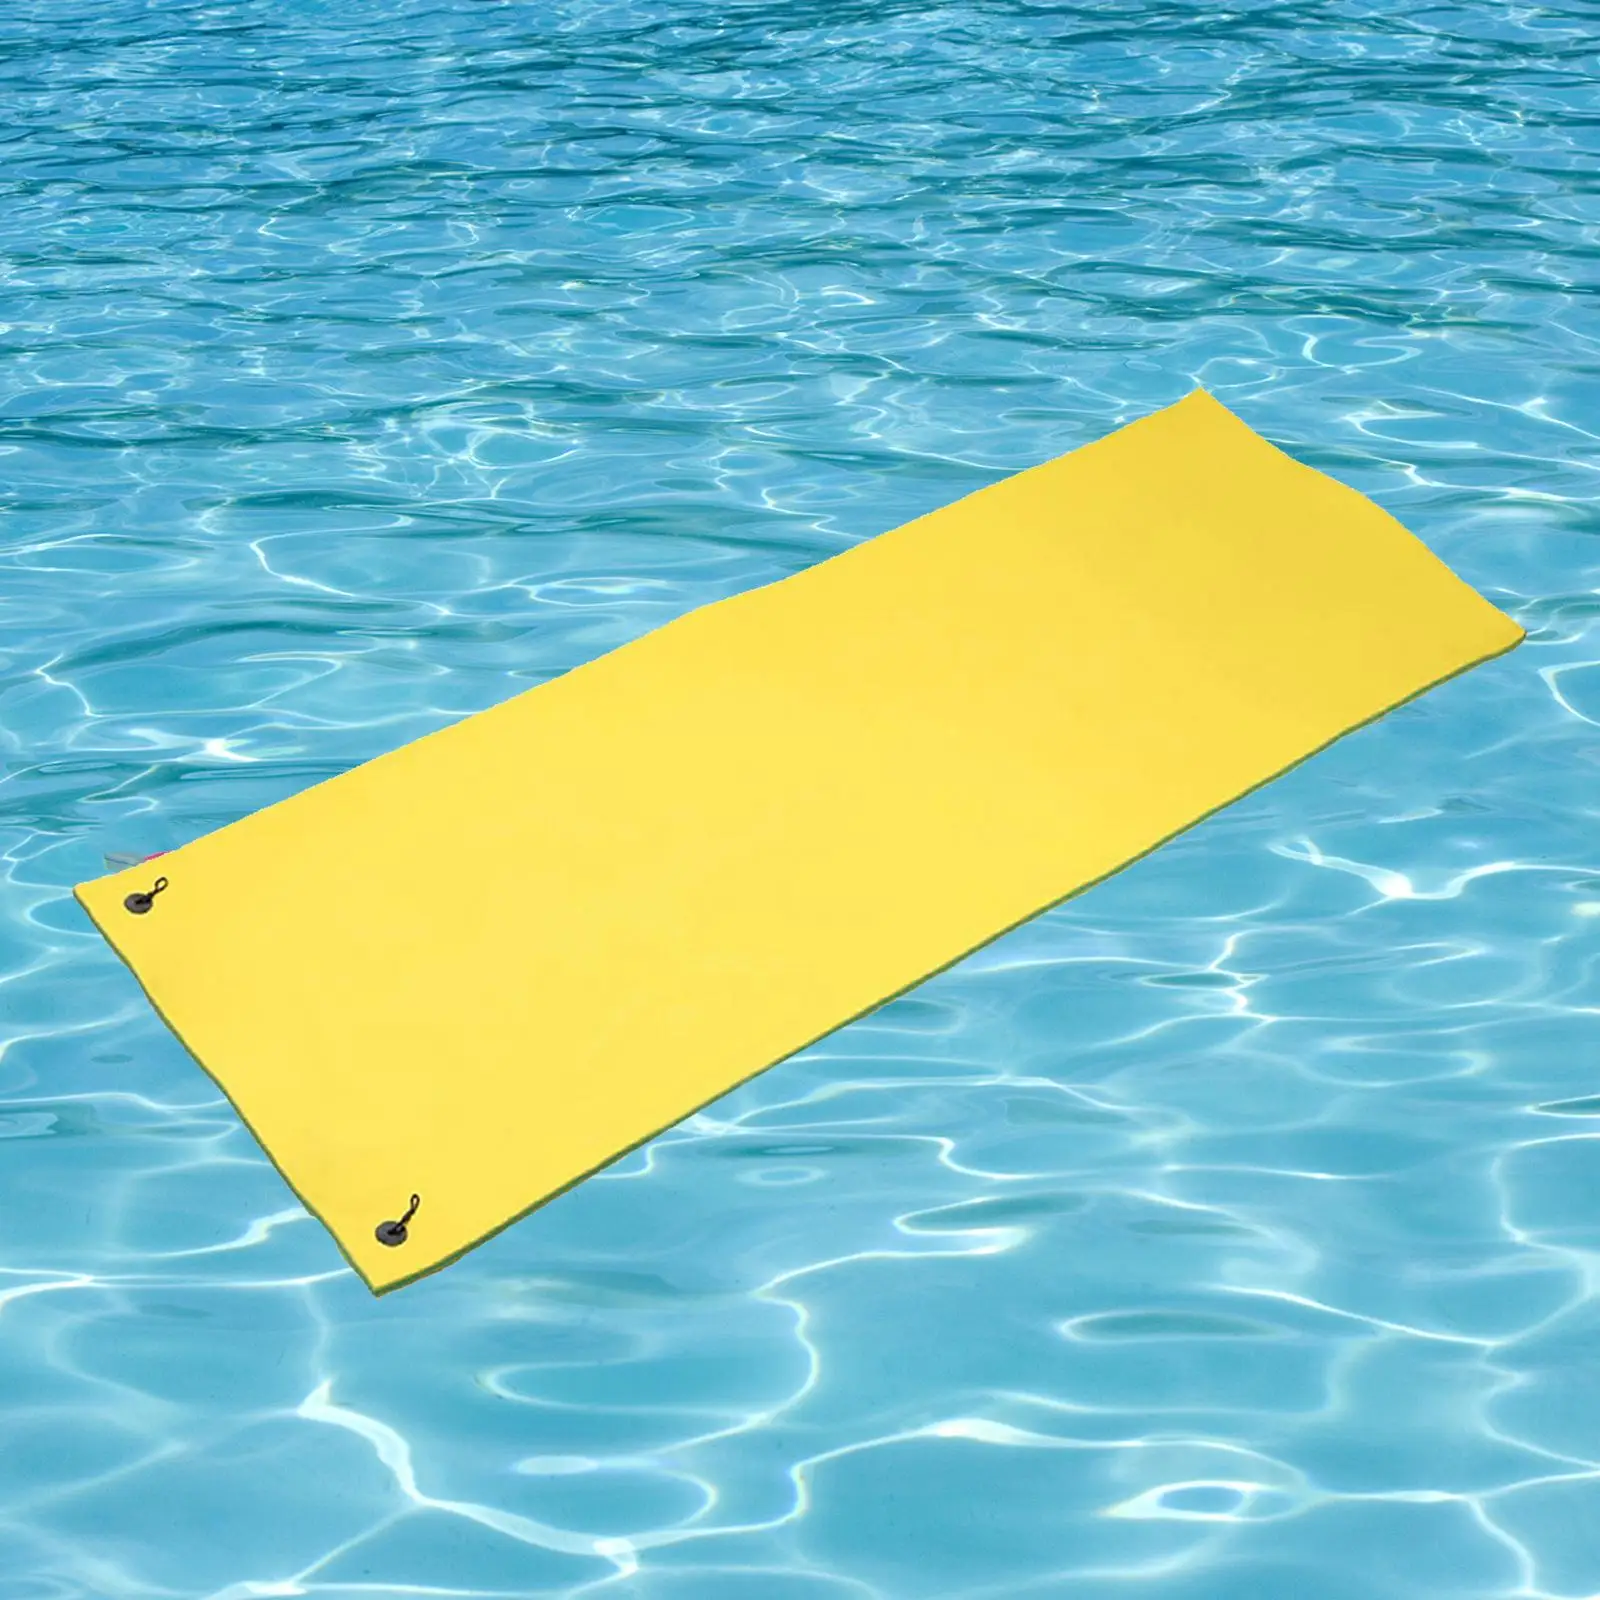 Pool Water Floating Mat 3 Layer Water Raft 106x35.4x1.3inch Simple to Clean with Soap and Water for Relaxation Roll up Pad